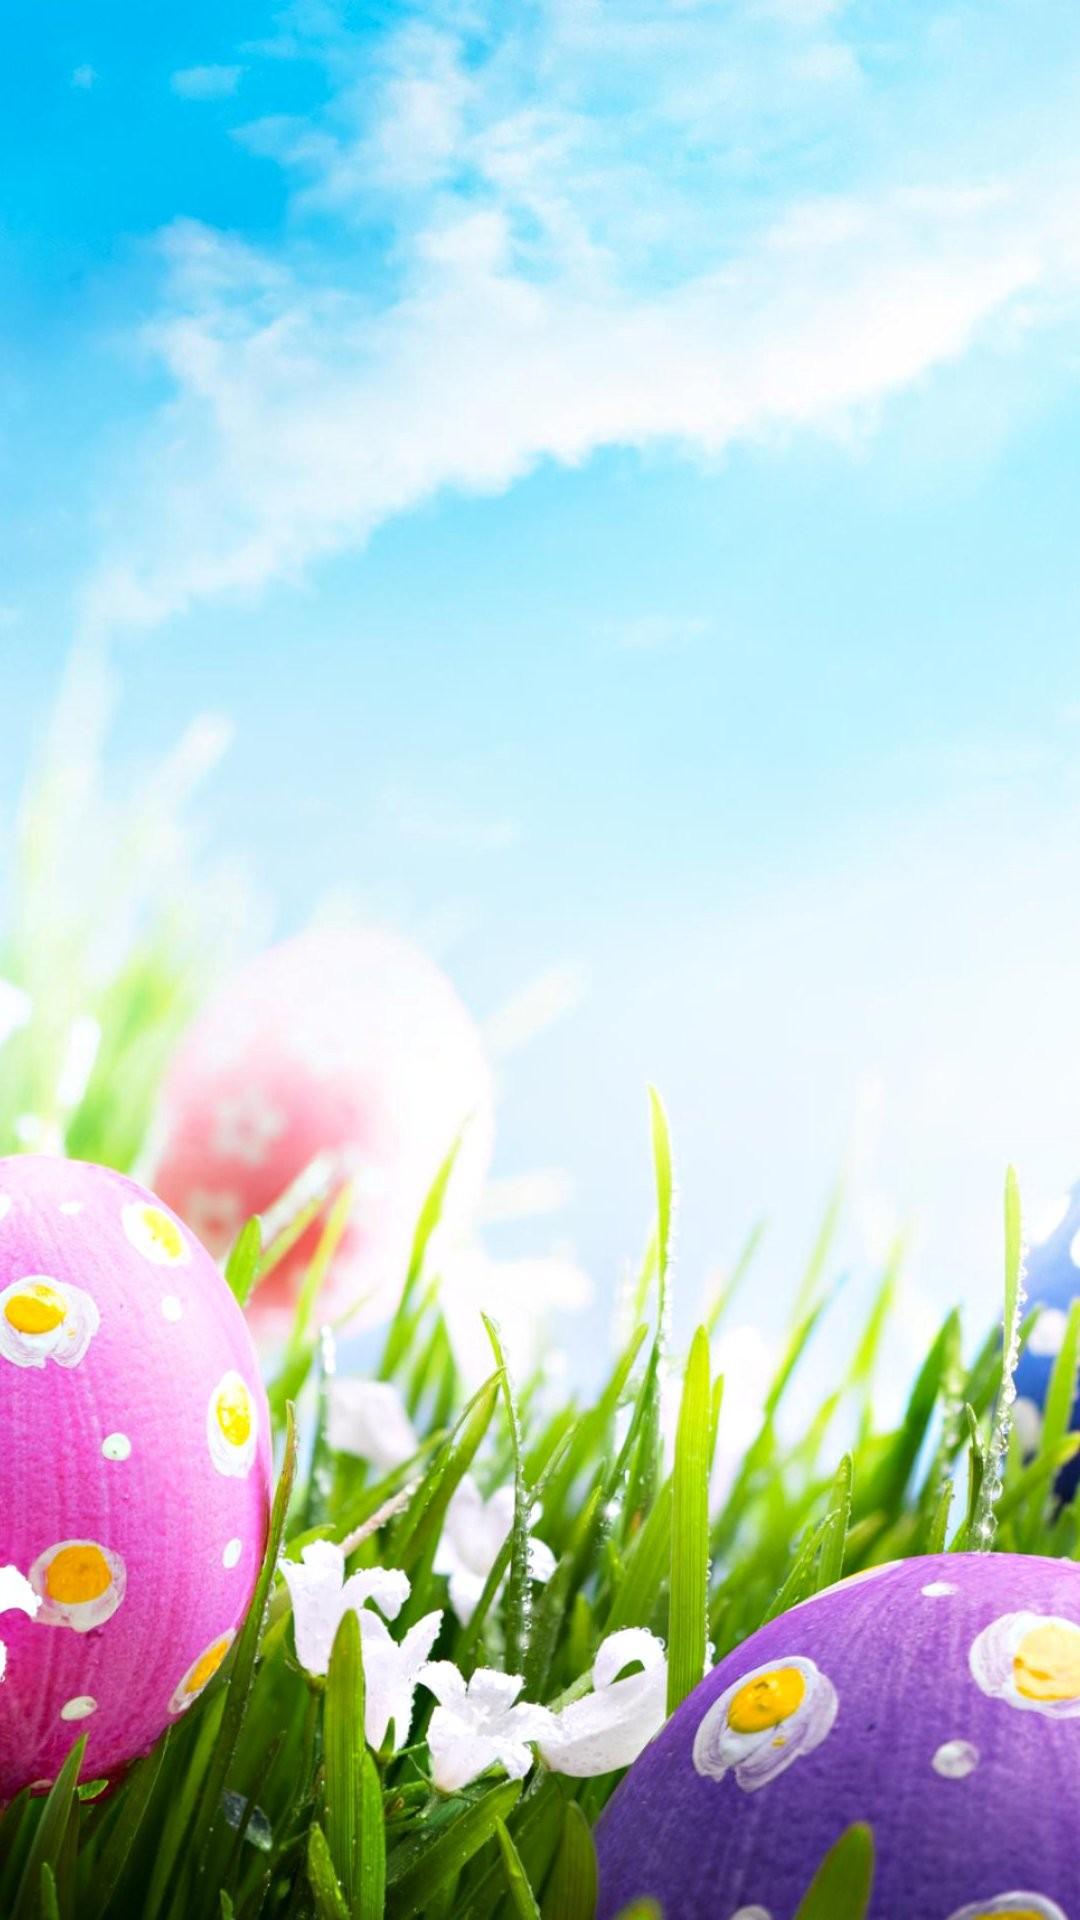 25 Cute Easter Wallpaper Backgrounds For Iphone  Easter wallpaper Happy easter  wallpaper Spring wallpaper